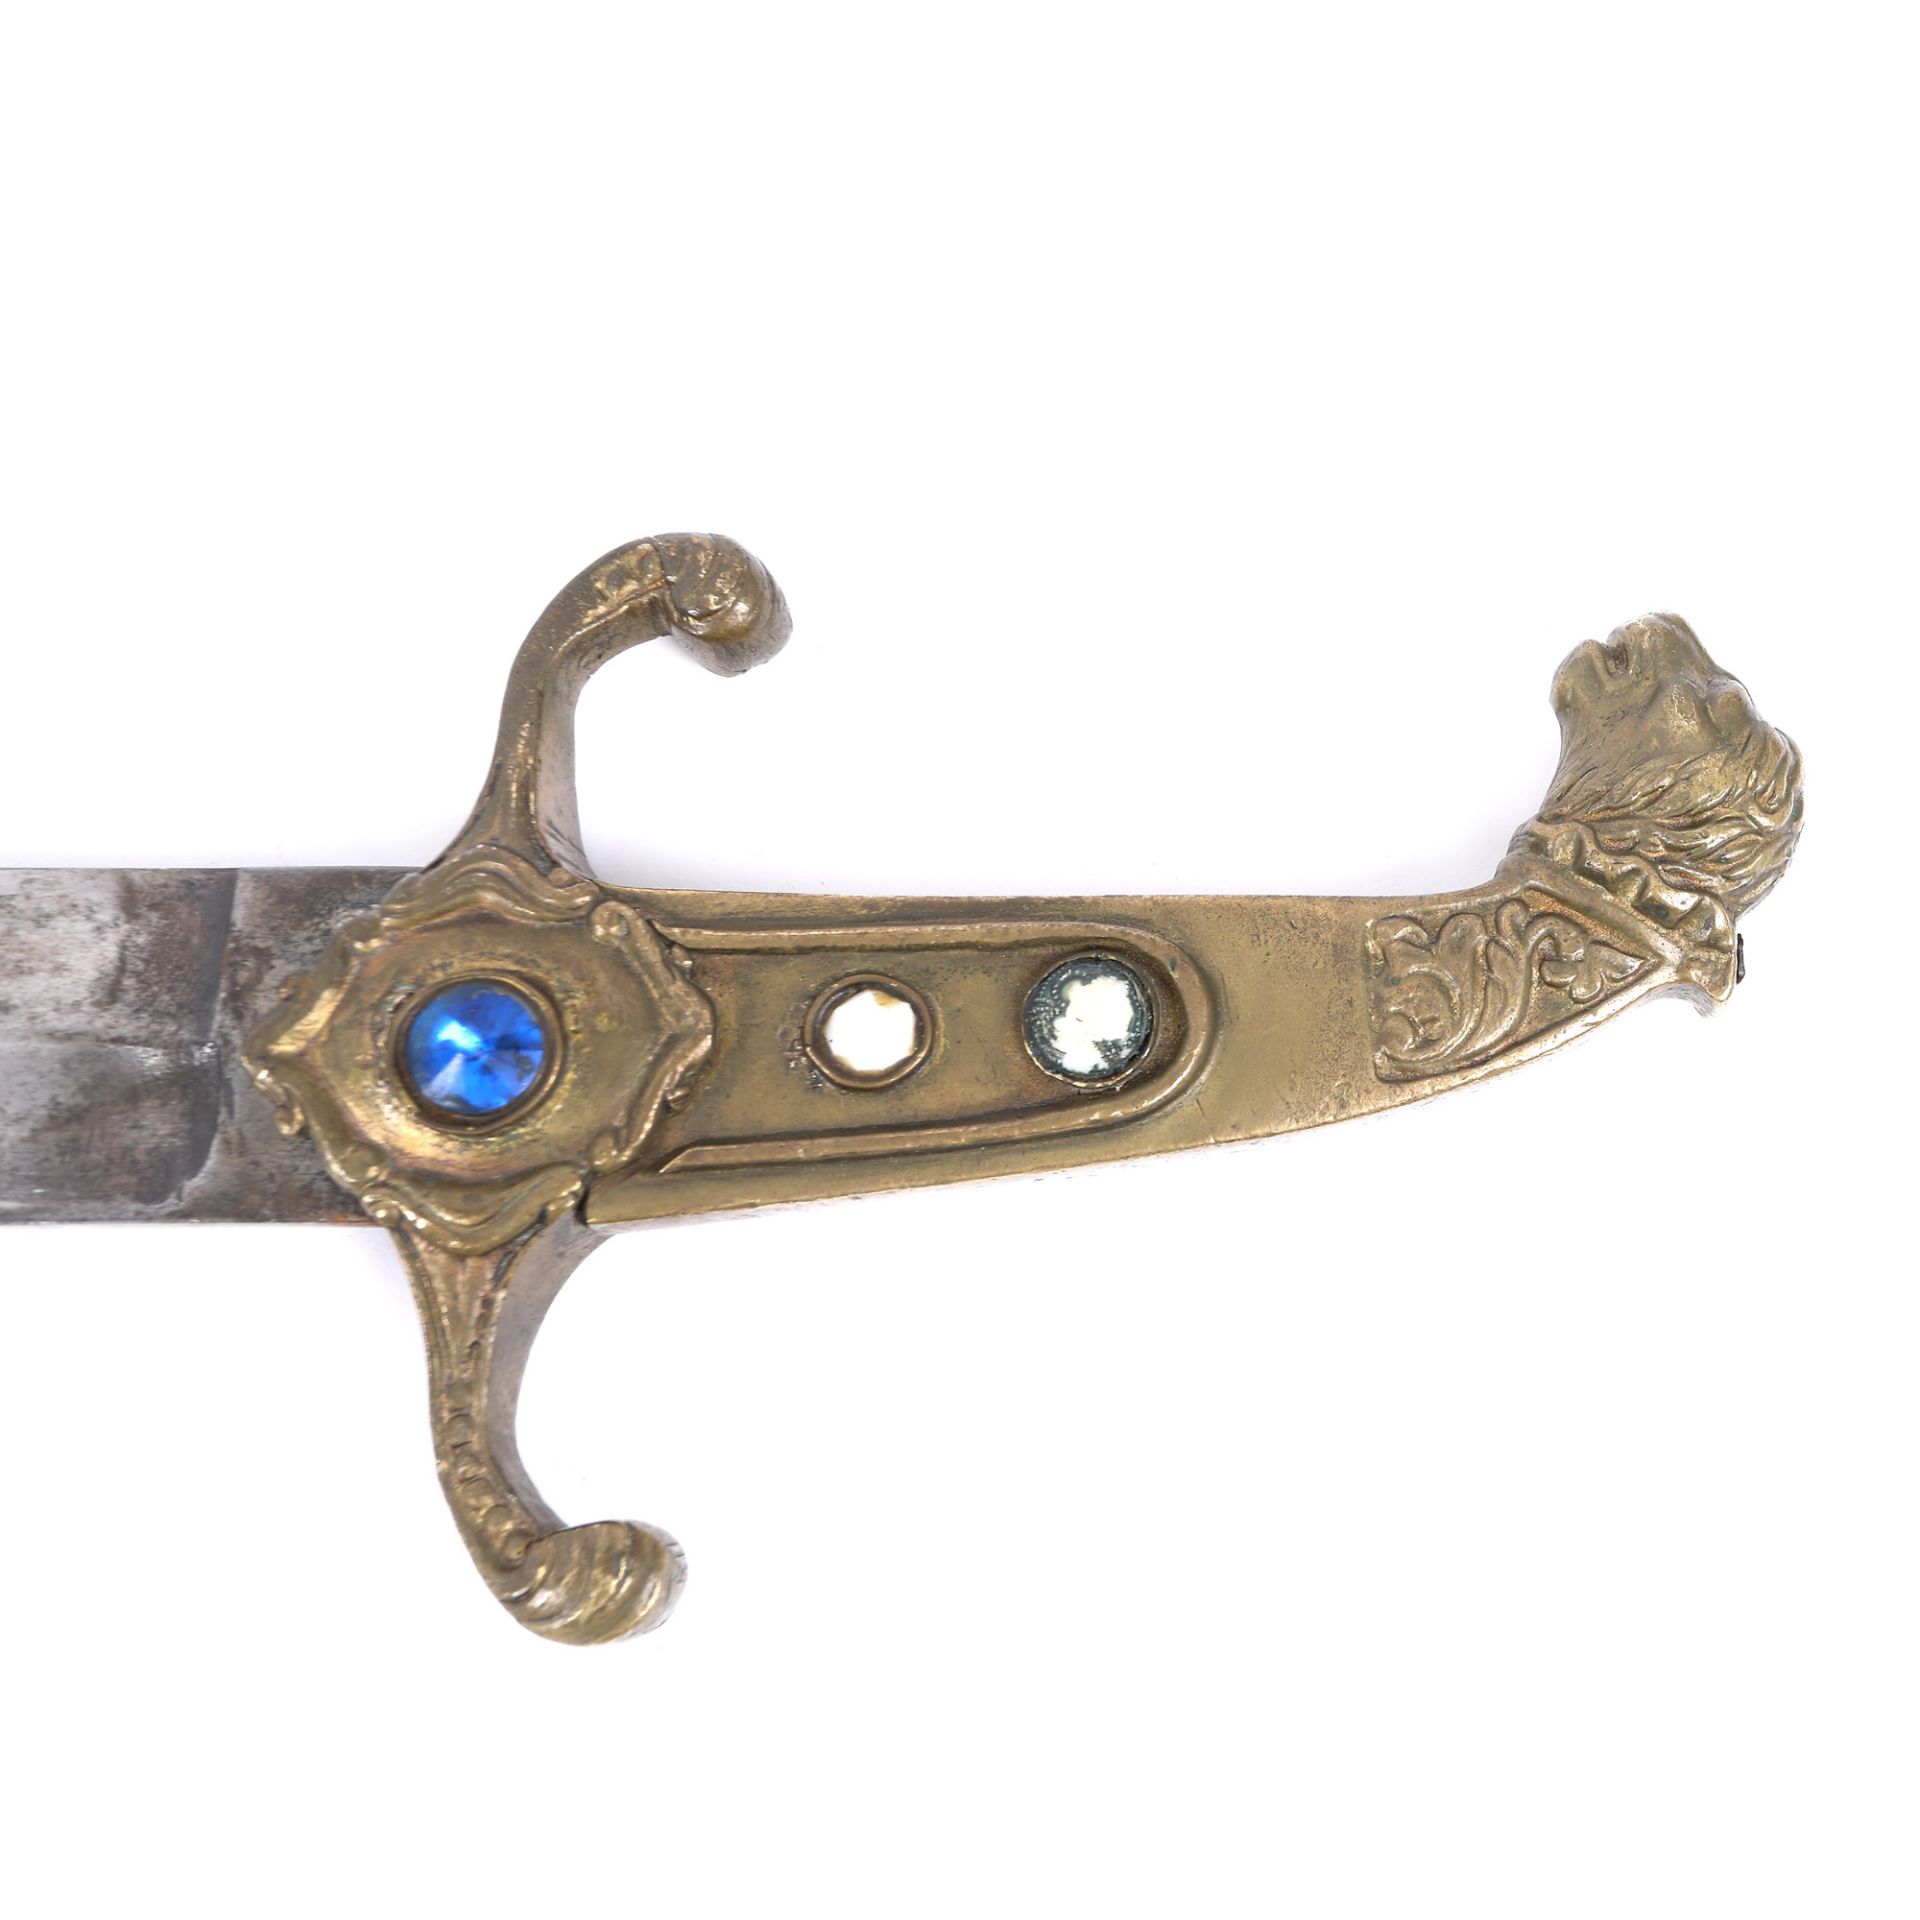 Shamshir Islamic sword, decorated with a lion’s head, end of the 19th century - Image 3 of 3